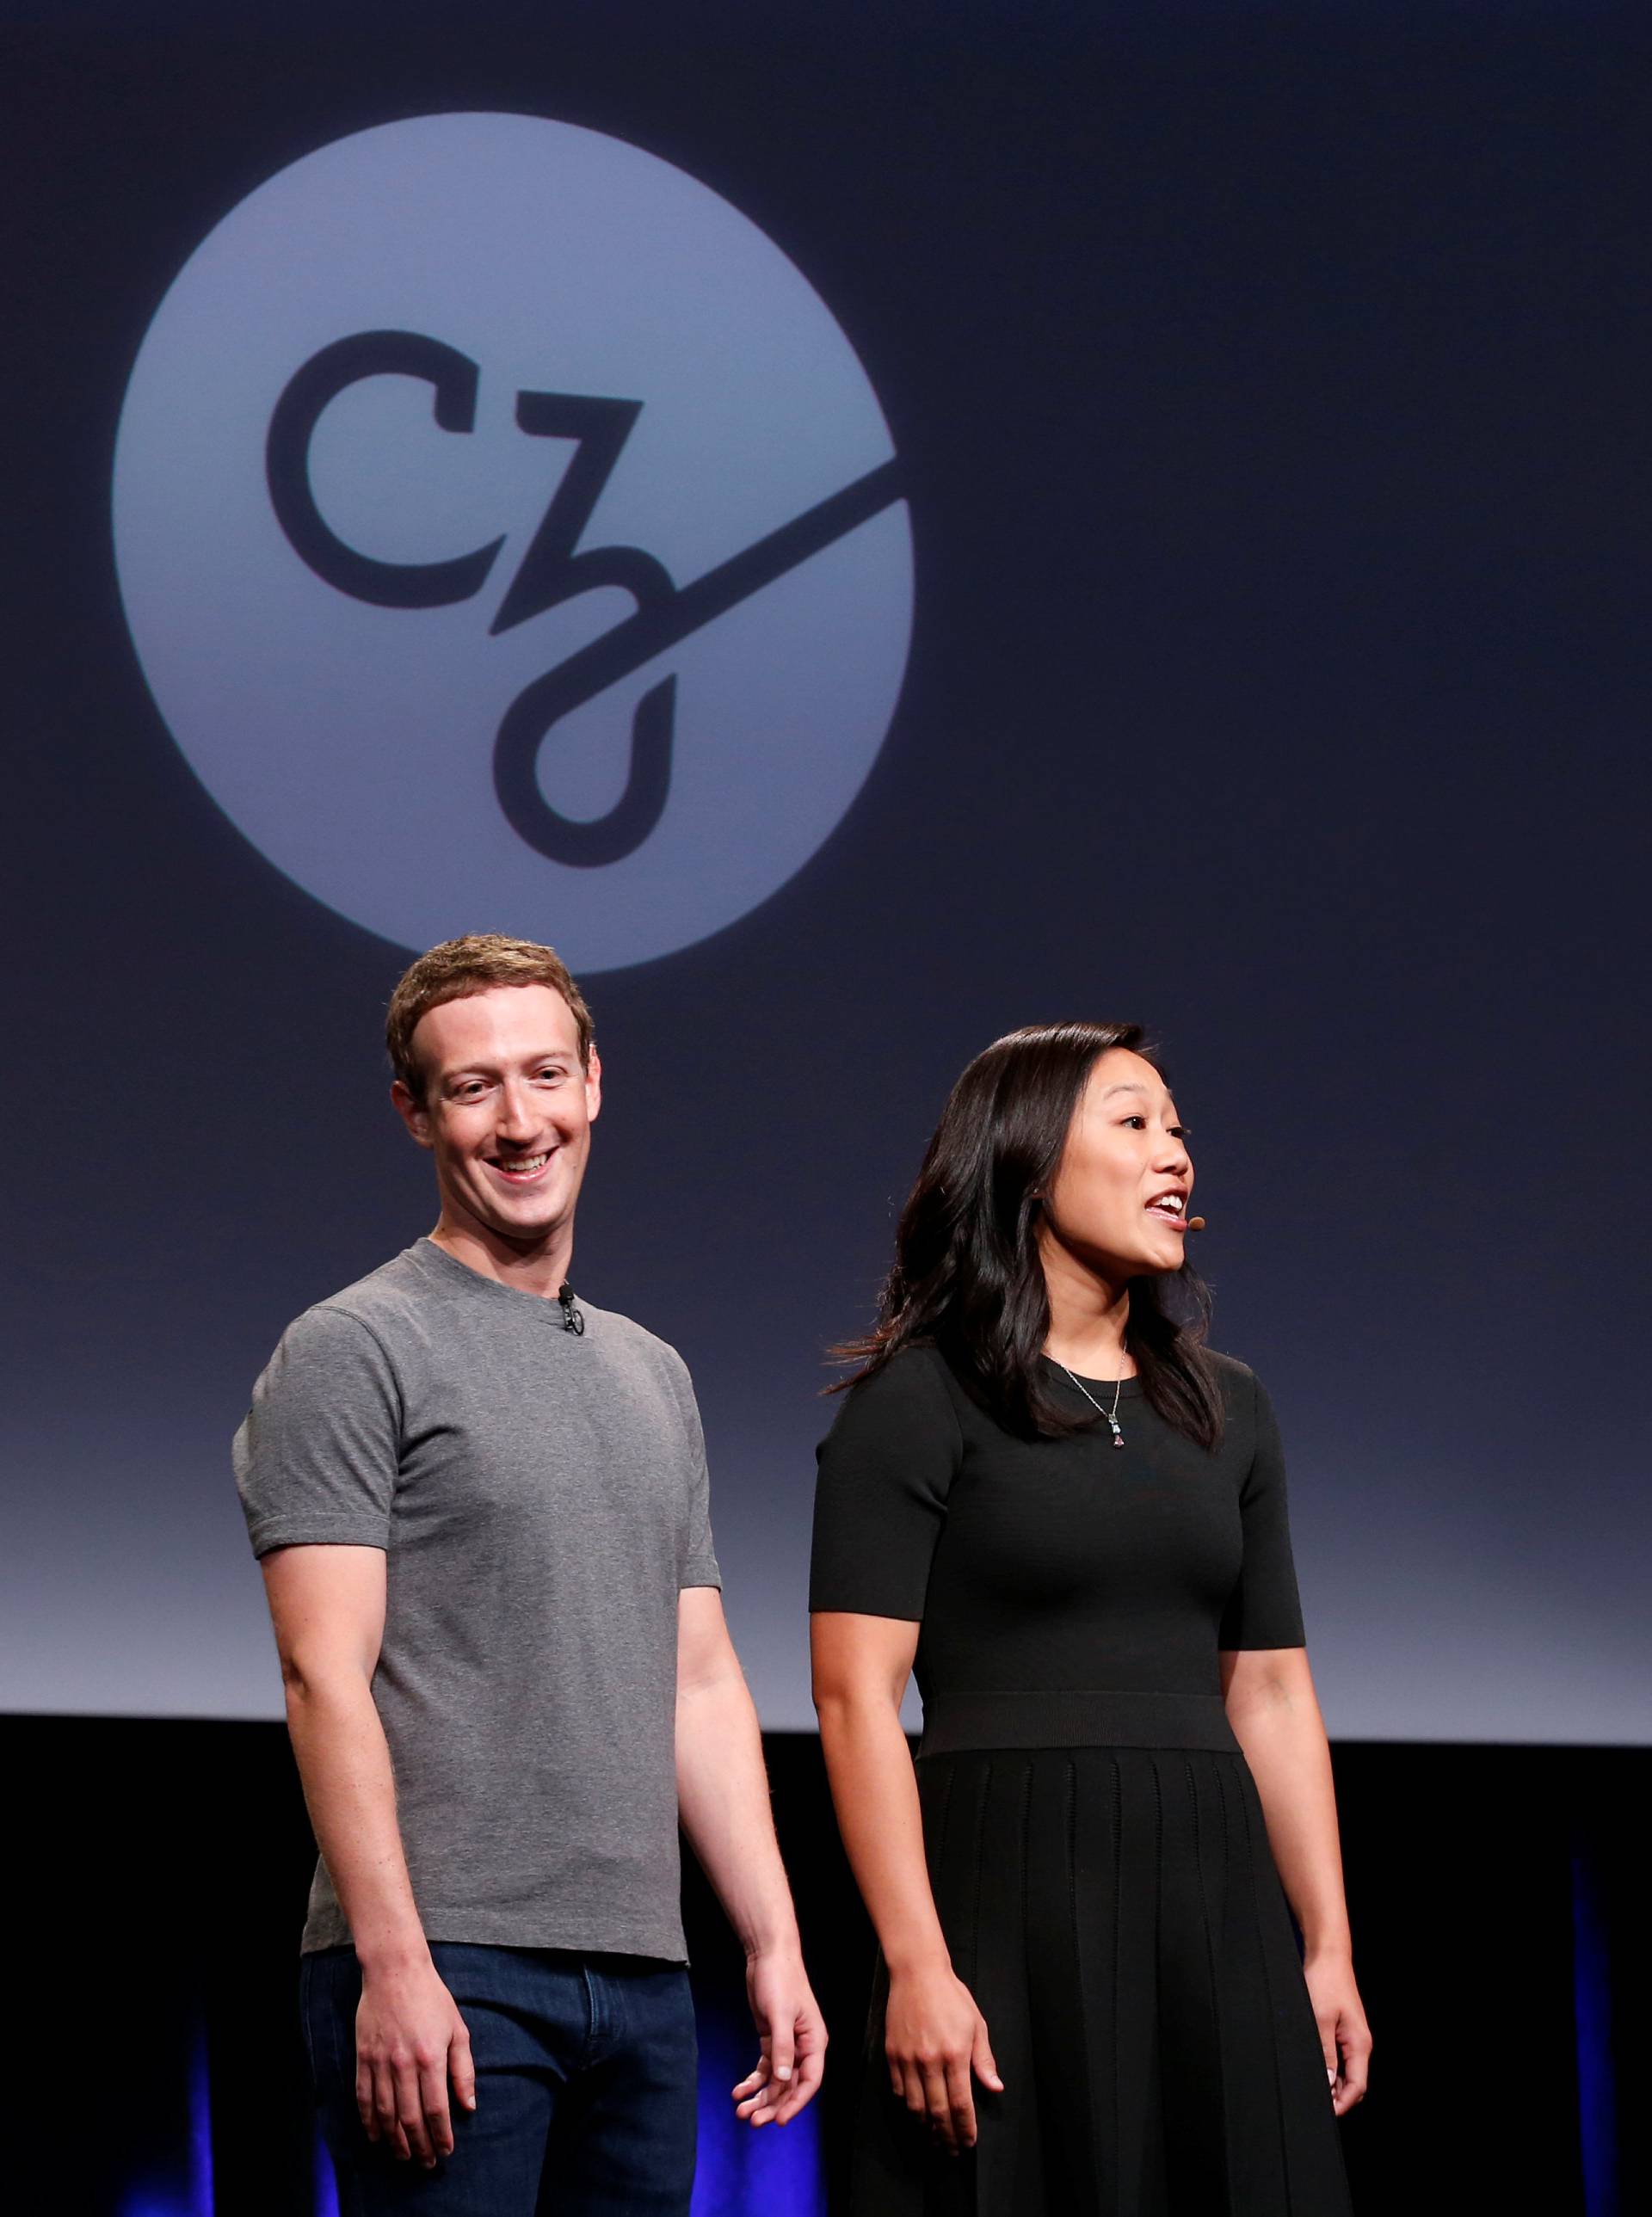 Priscilla Chan and her husband Mark Zuckerberg announce the Chan Zuckerberg Initiative to cure all diseases by the end of the century during a news conference at UCSF Mission Bay in San Francisco, California